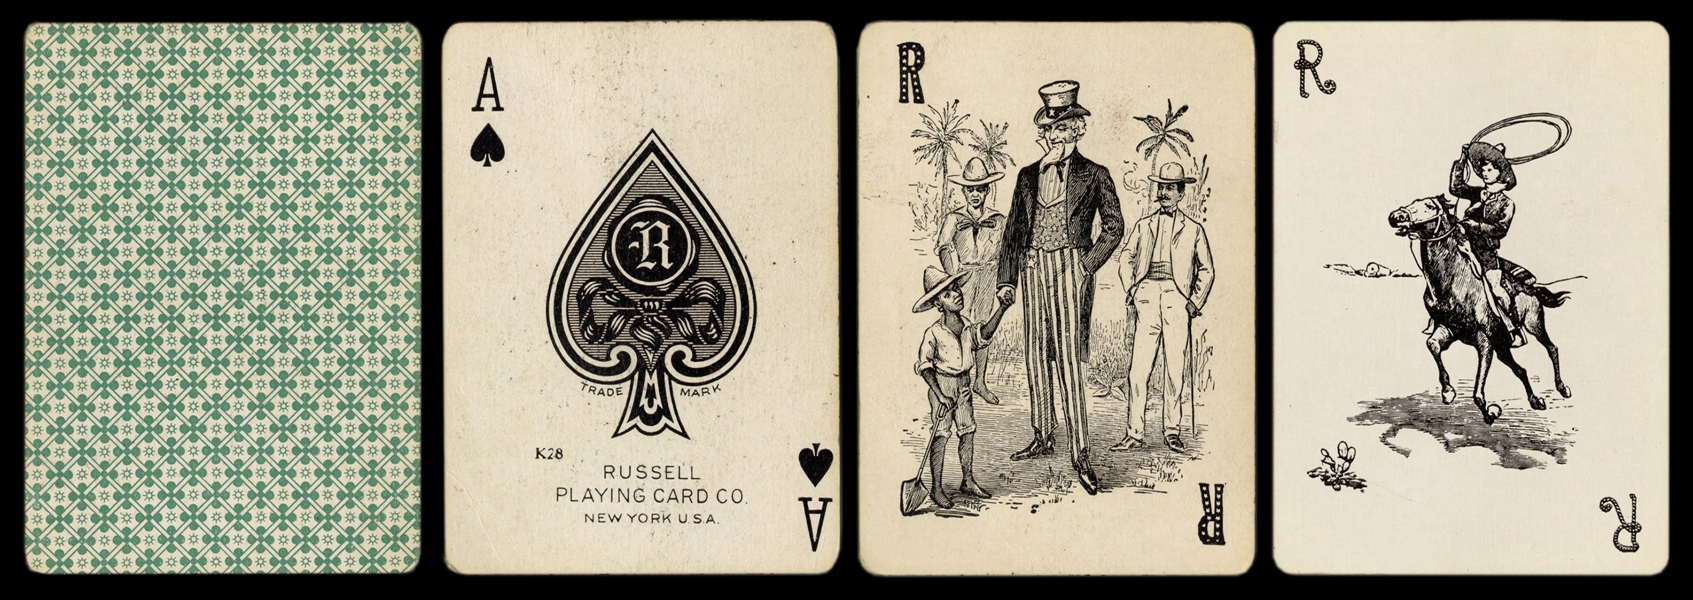  Russell’s Recruits No. 76 Playing Cards. Milltown, NJ: Will...